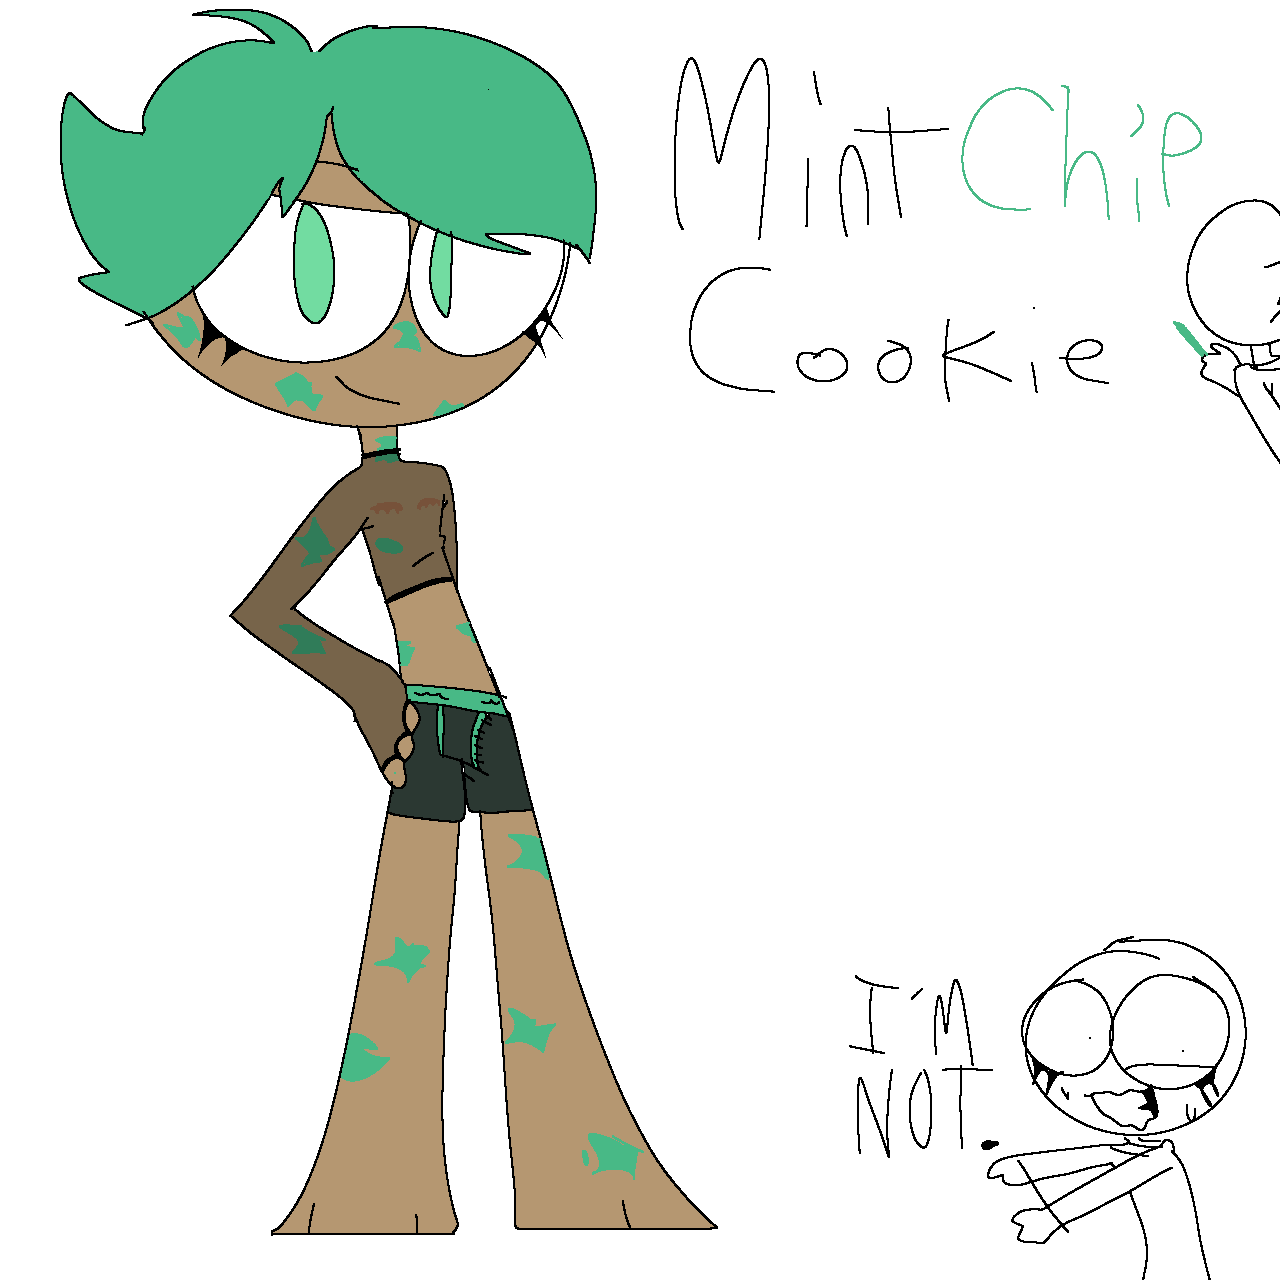 Mind Chip Cookie but yeah